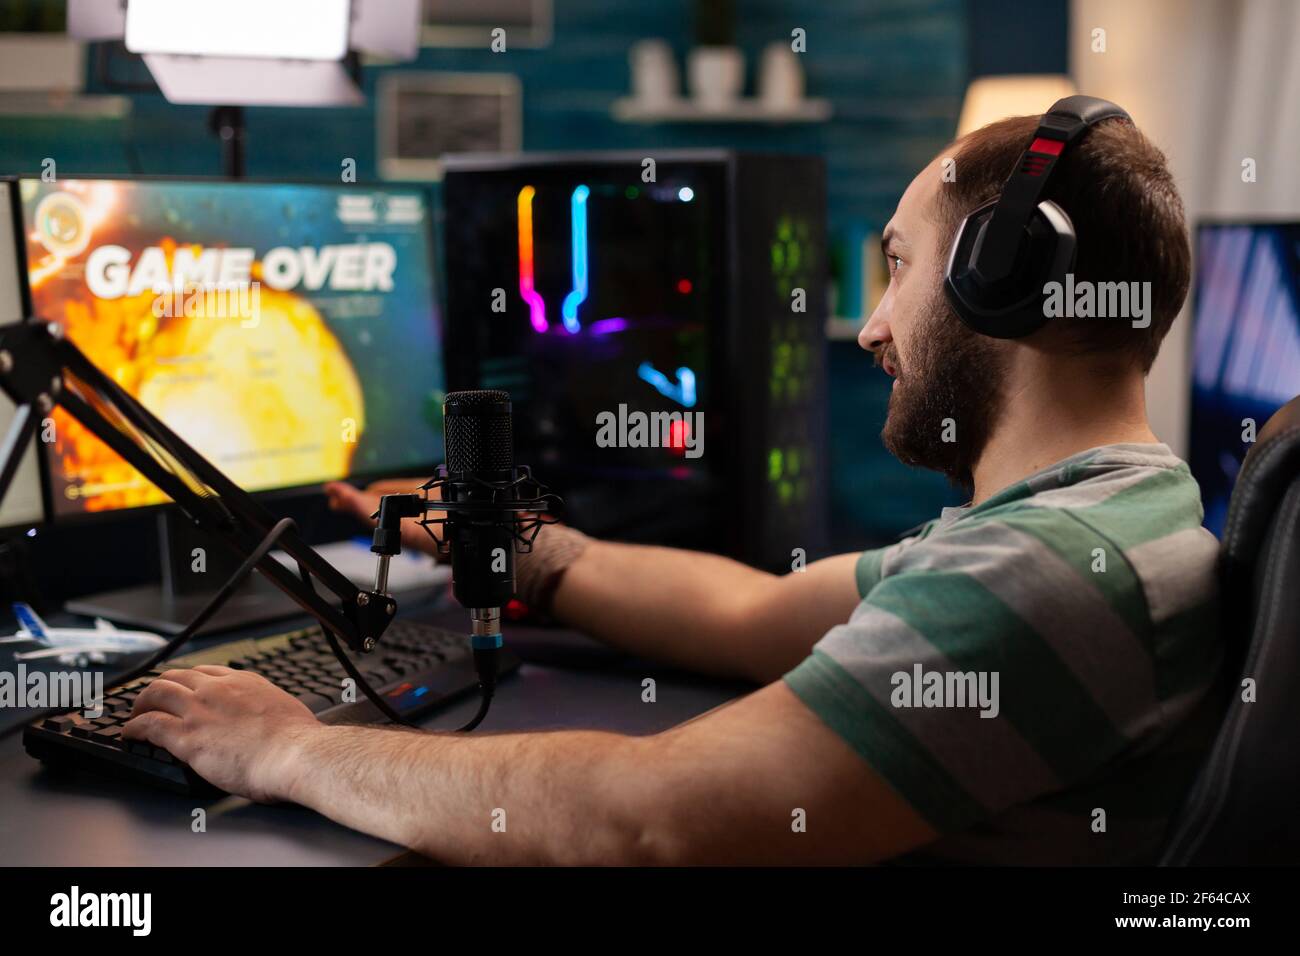 Streamer losing virtual videogames competition use professional setup with streaming chat open. Online cyber performing during gaming tournament using technology network wireless Stock Photo